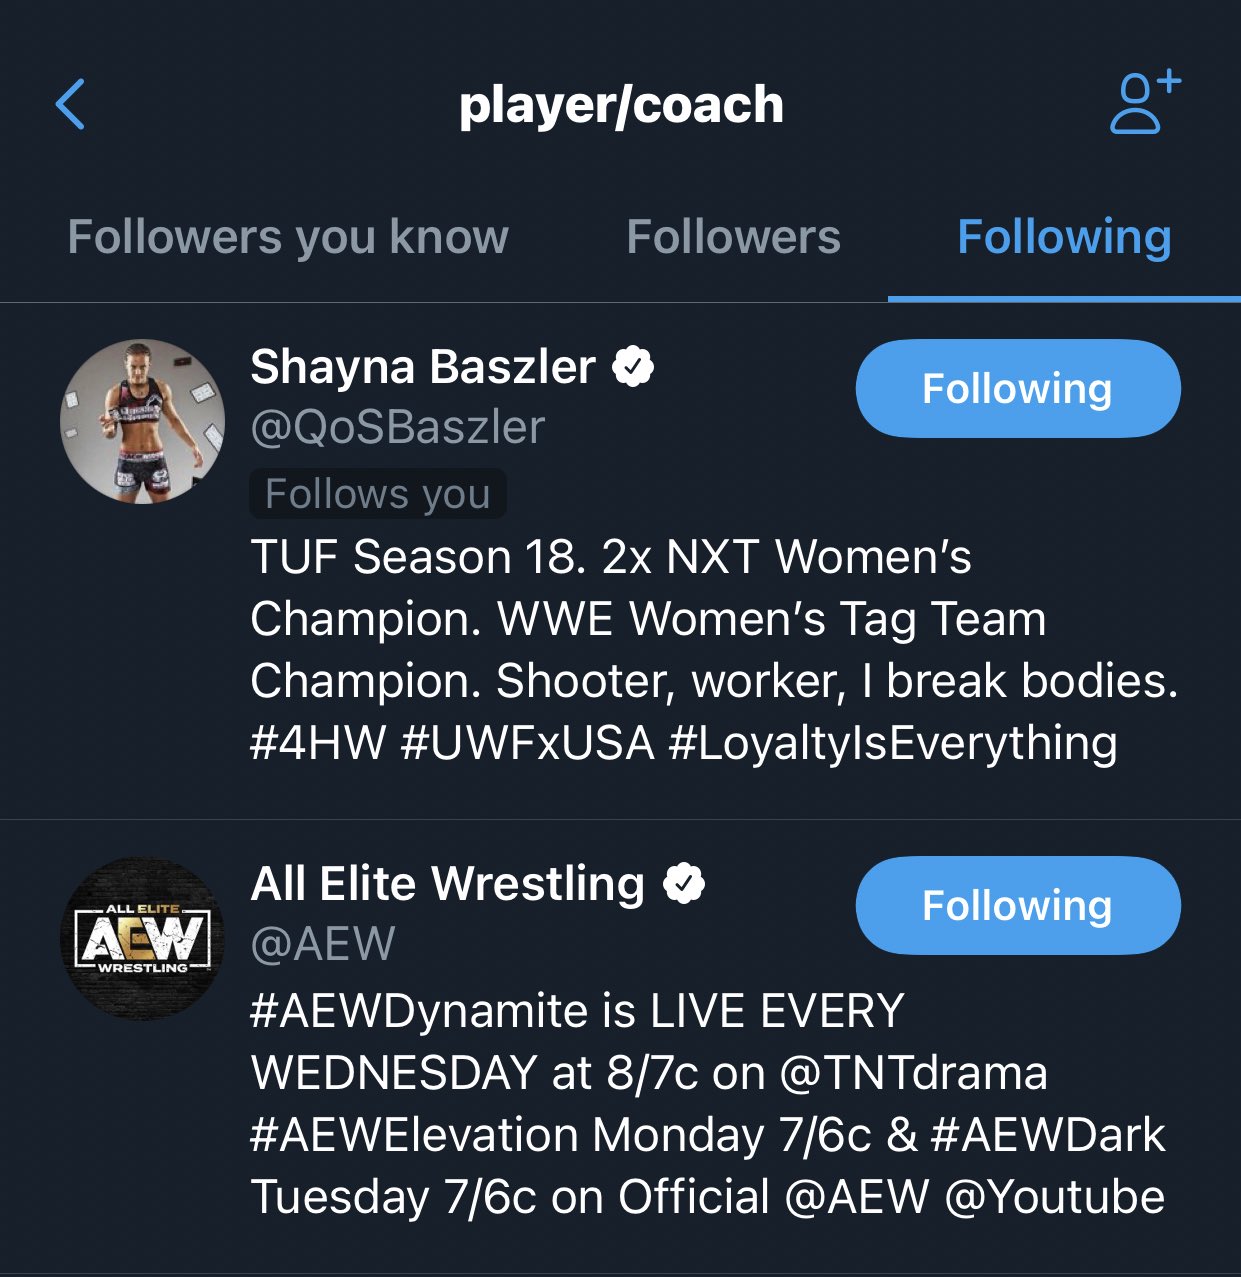 𝐃𝐫𝐚𝐕𝐞𝐧 Not Only Is Living Colour Following Aew But Cm Punk Is As Well This Is Getting Very Real T Co R1dh3hk3os Twitter